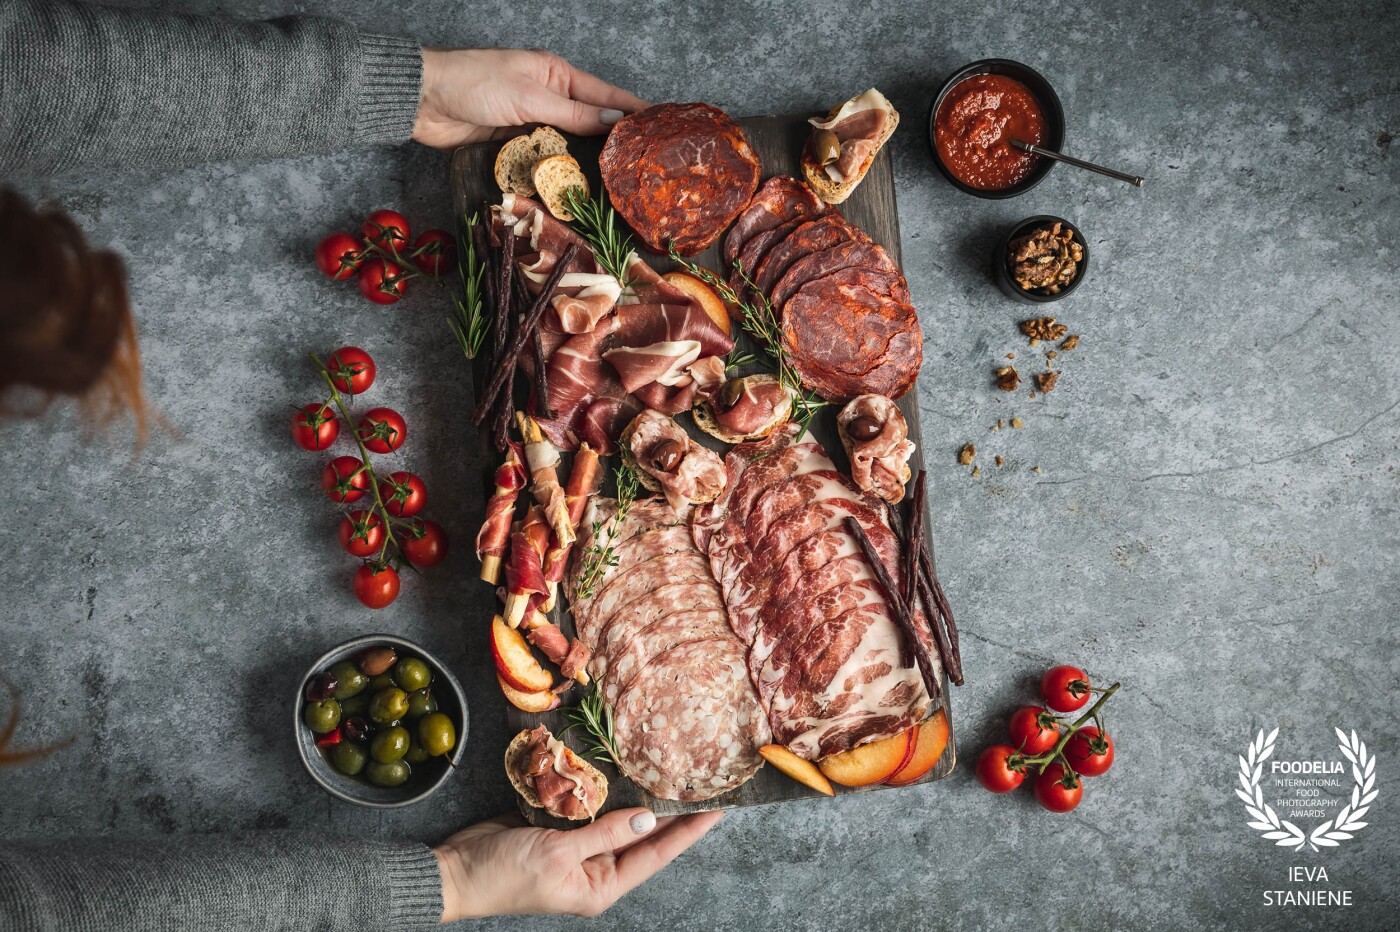 I made this meat platter in a collaboration with my client. The idea was to show the variety of meat products and to catch the eye with an inviting scene.